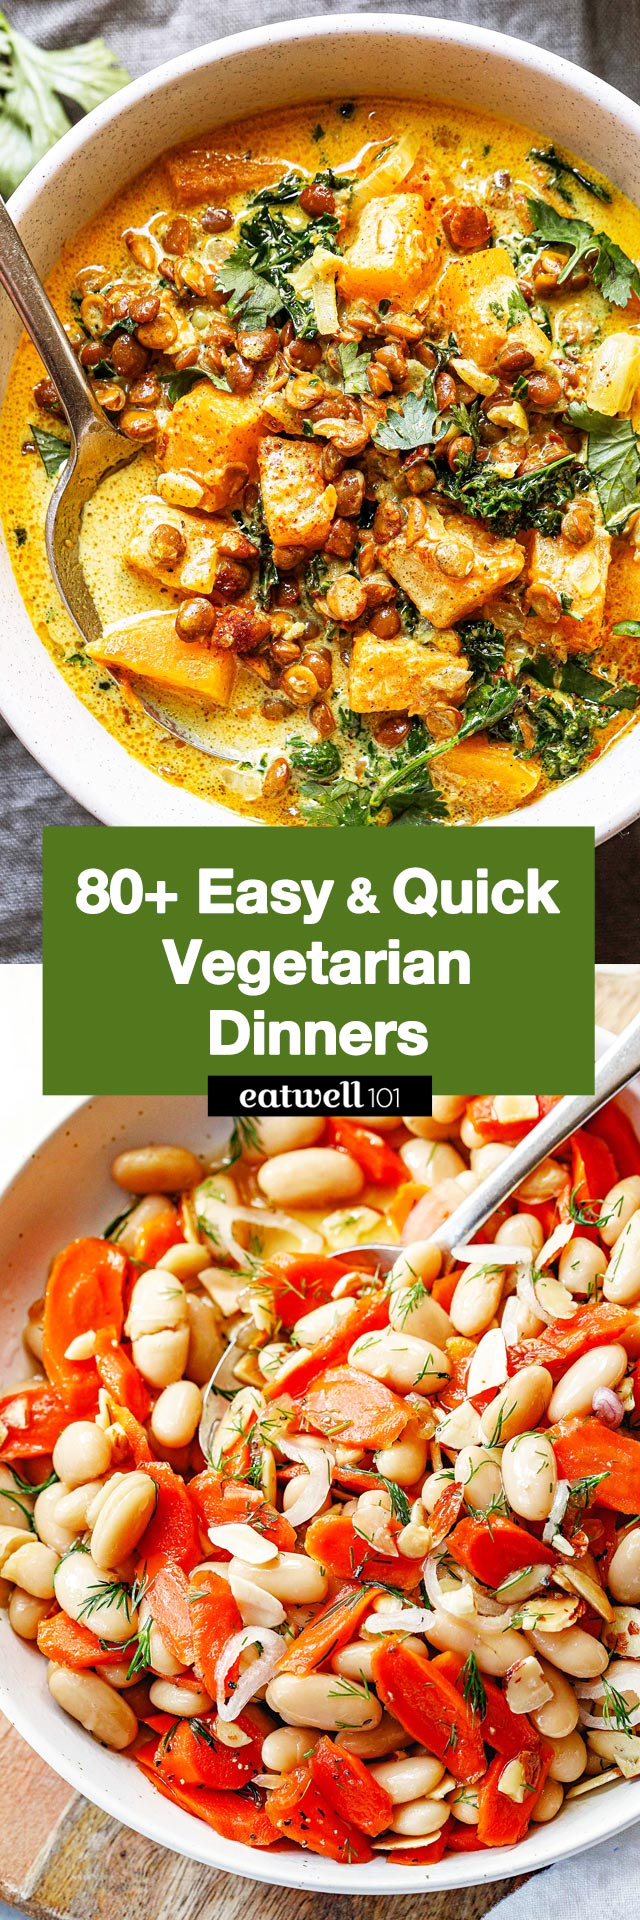 80+ Best Easy Vegetarian Recipes For Dinner - #vegetarian #dinner #recipes #eatwell101 - Looking forward to putting more vegetarian dishes in your diet?  These easy vegetarian recipes with fresh and healthy ingredients will help you be set for the week.